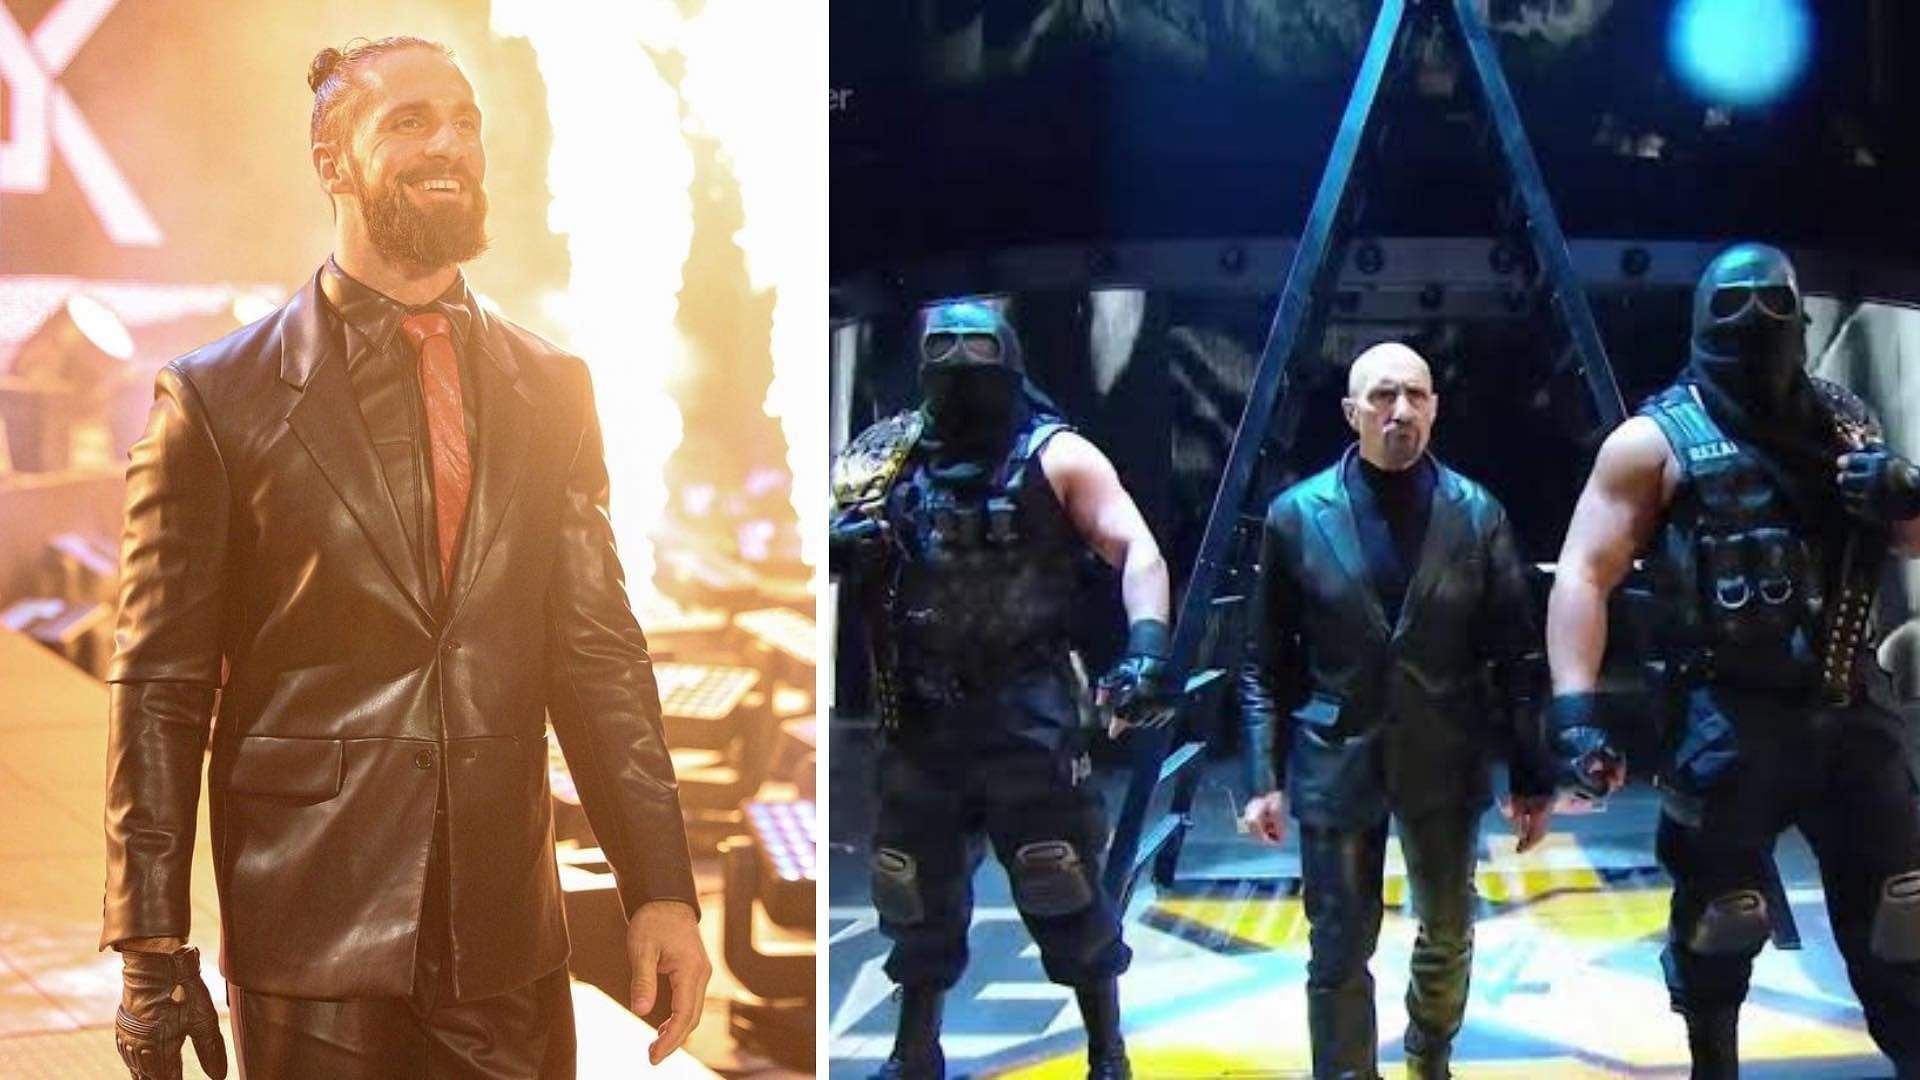 The Authors of Pain may be returning to WWE